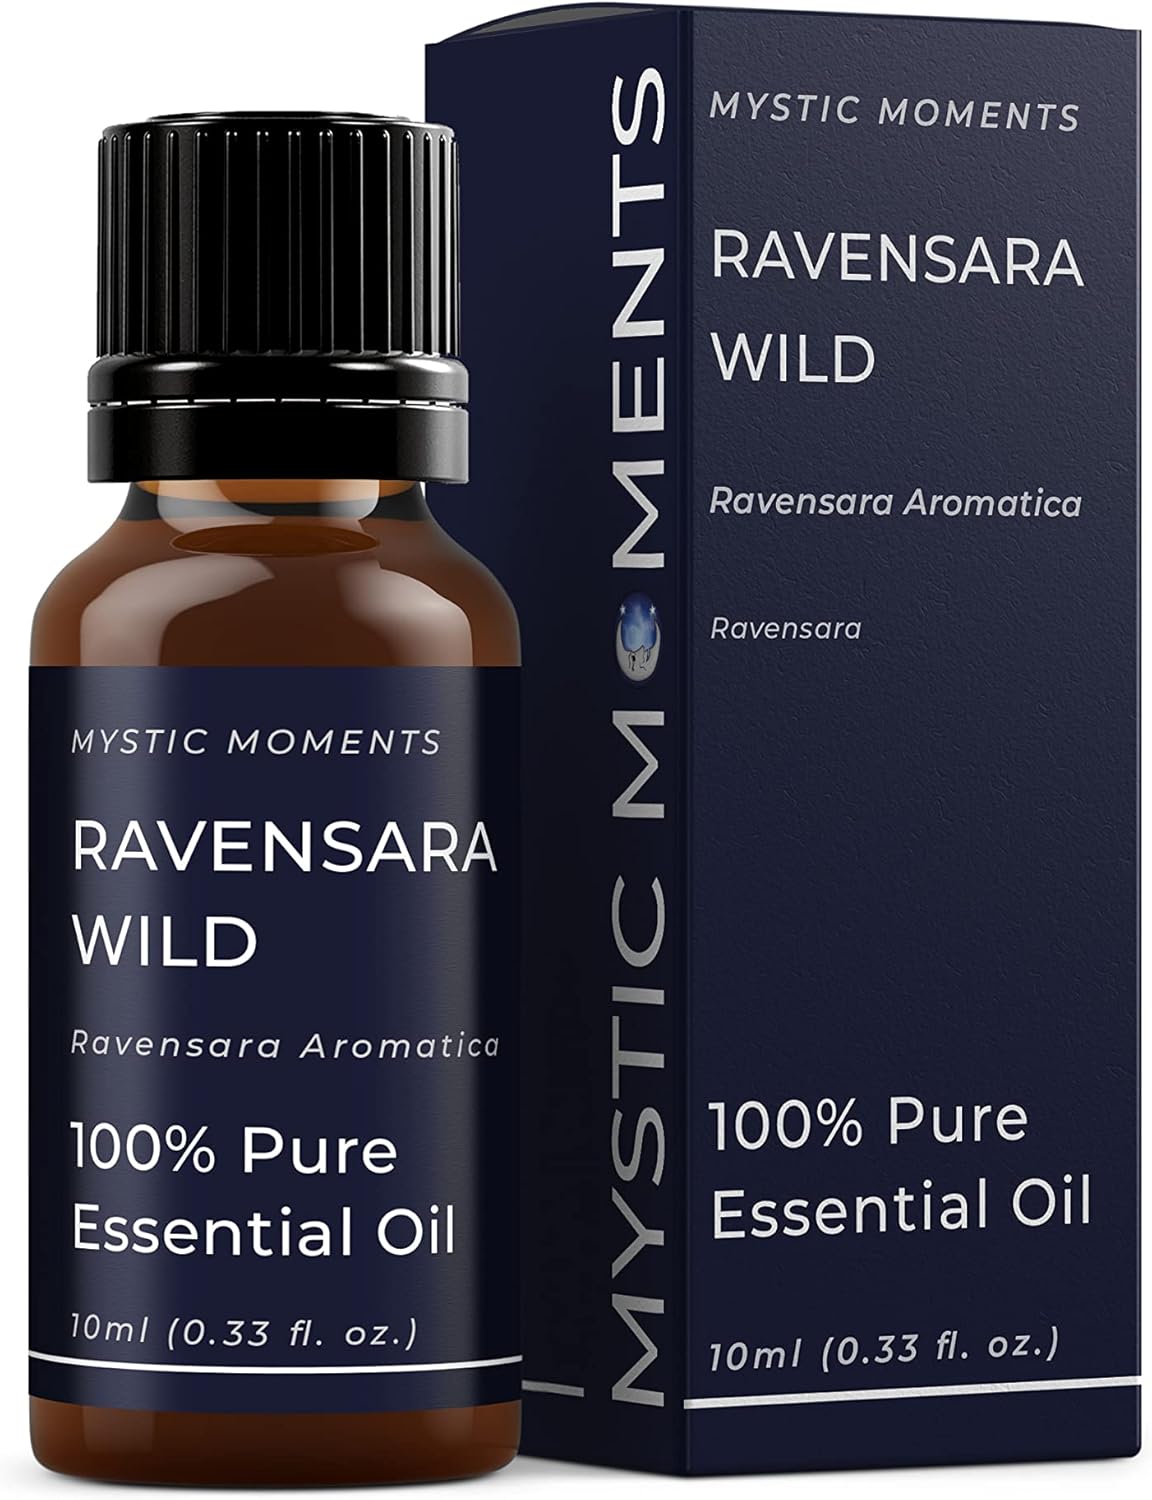 Mystic Moments | Ravensara Wild Essential Oil 10ml - Pure & Natural oil for Diffusers, Aromatherapy & Massage Blends Vegan GMO Free